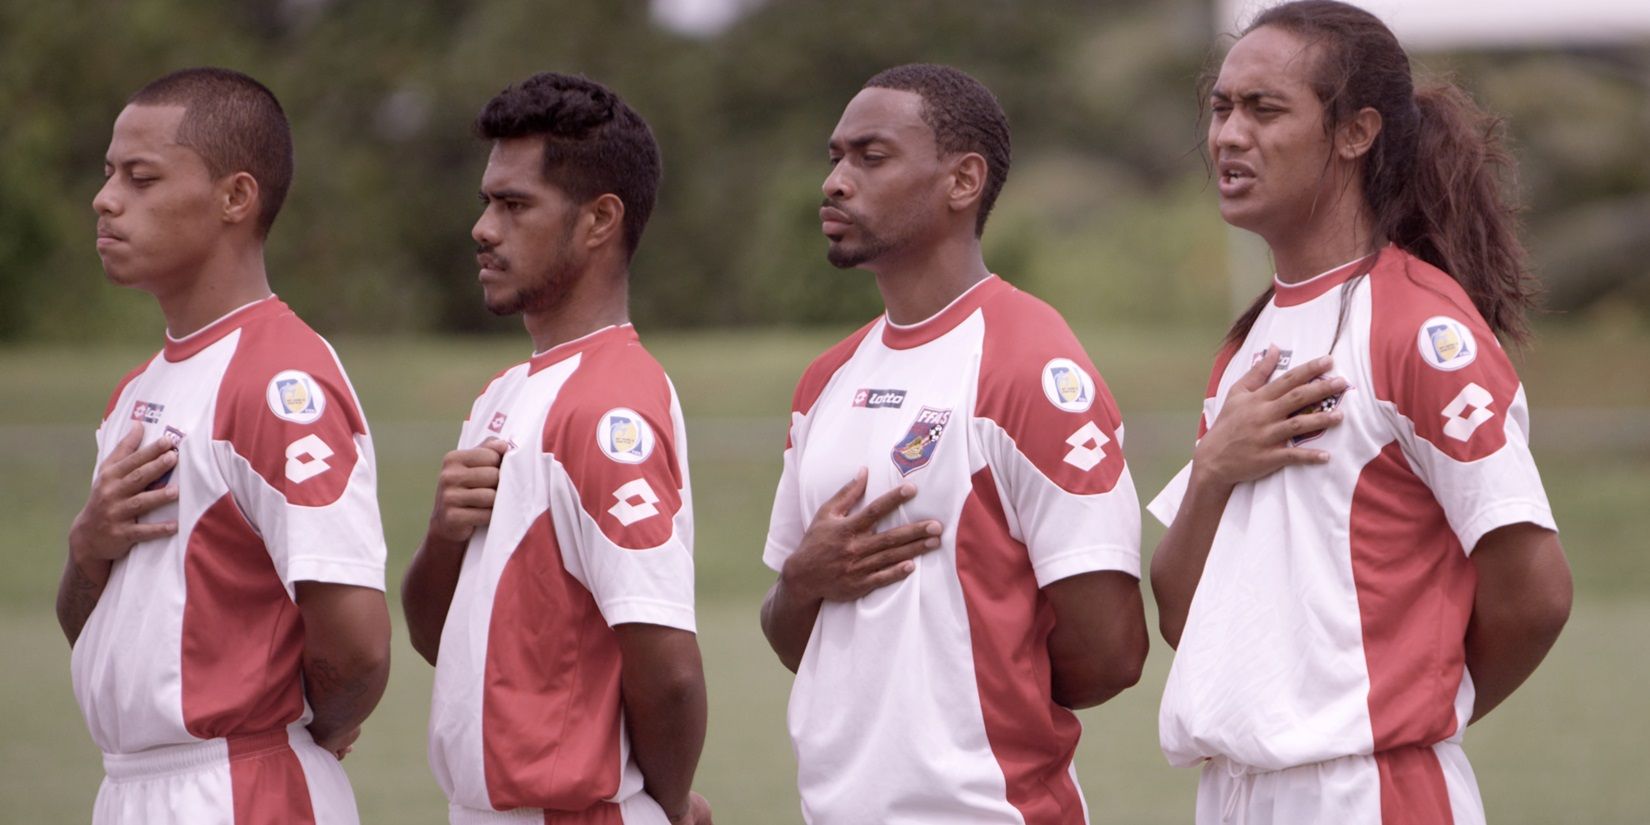 The American Samoa team on the pitch in Next Goal Wins documentary